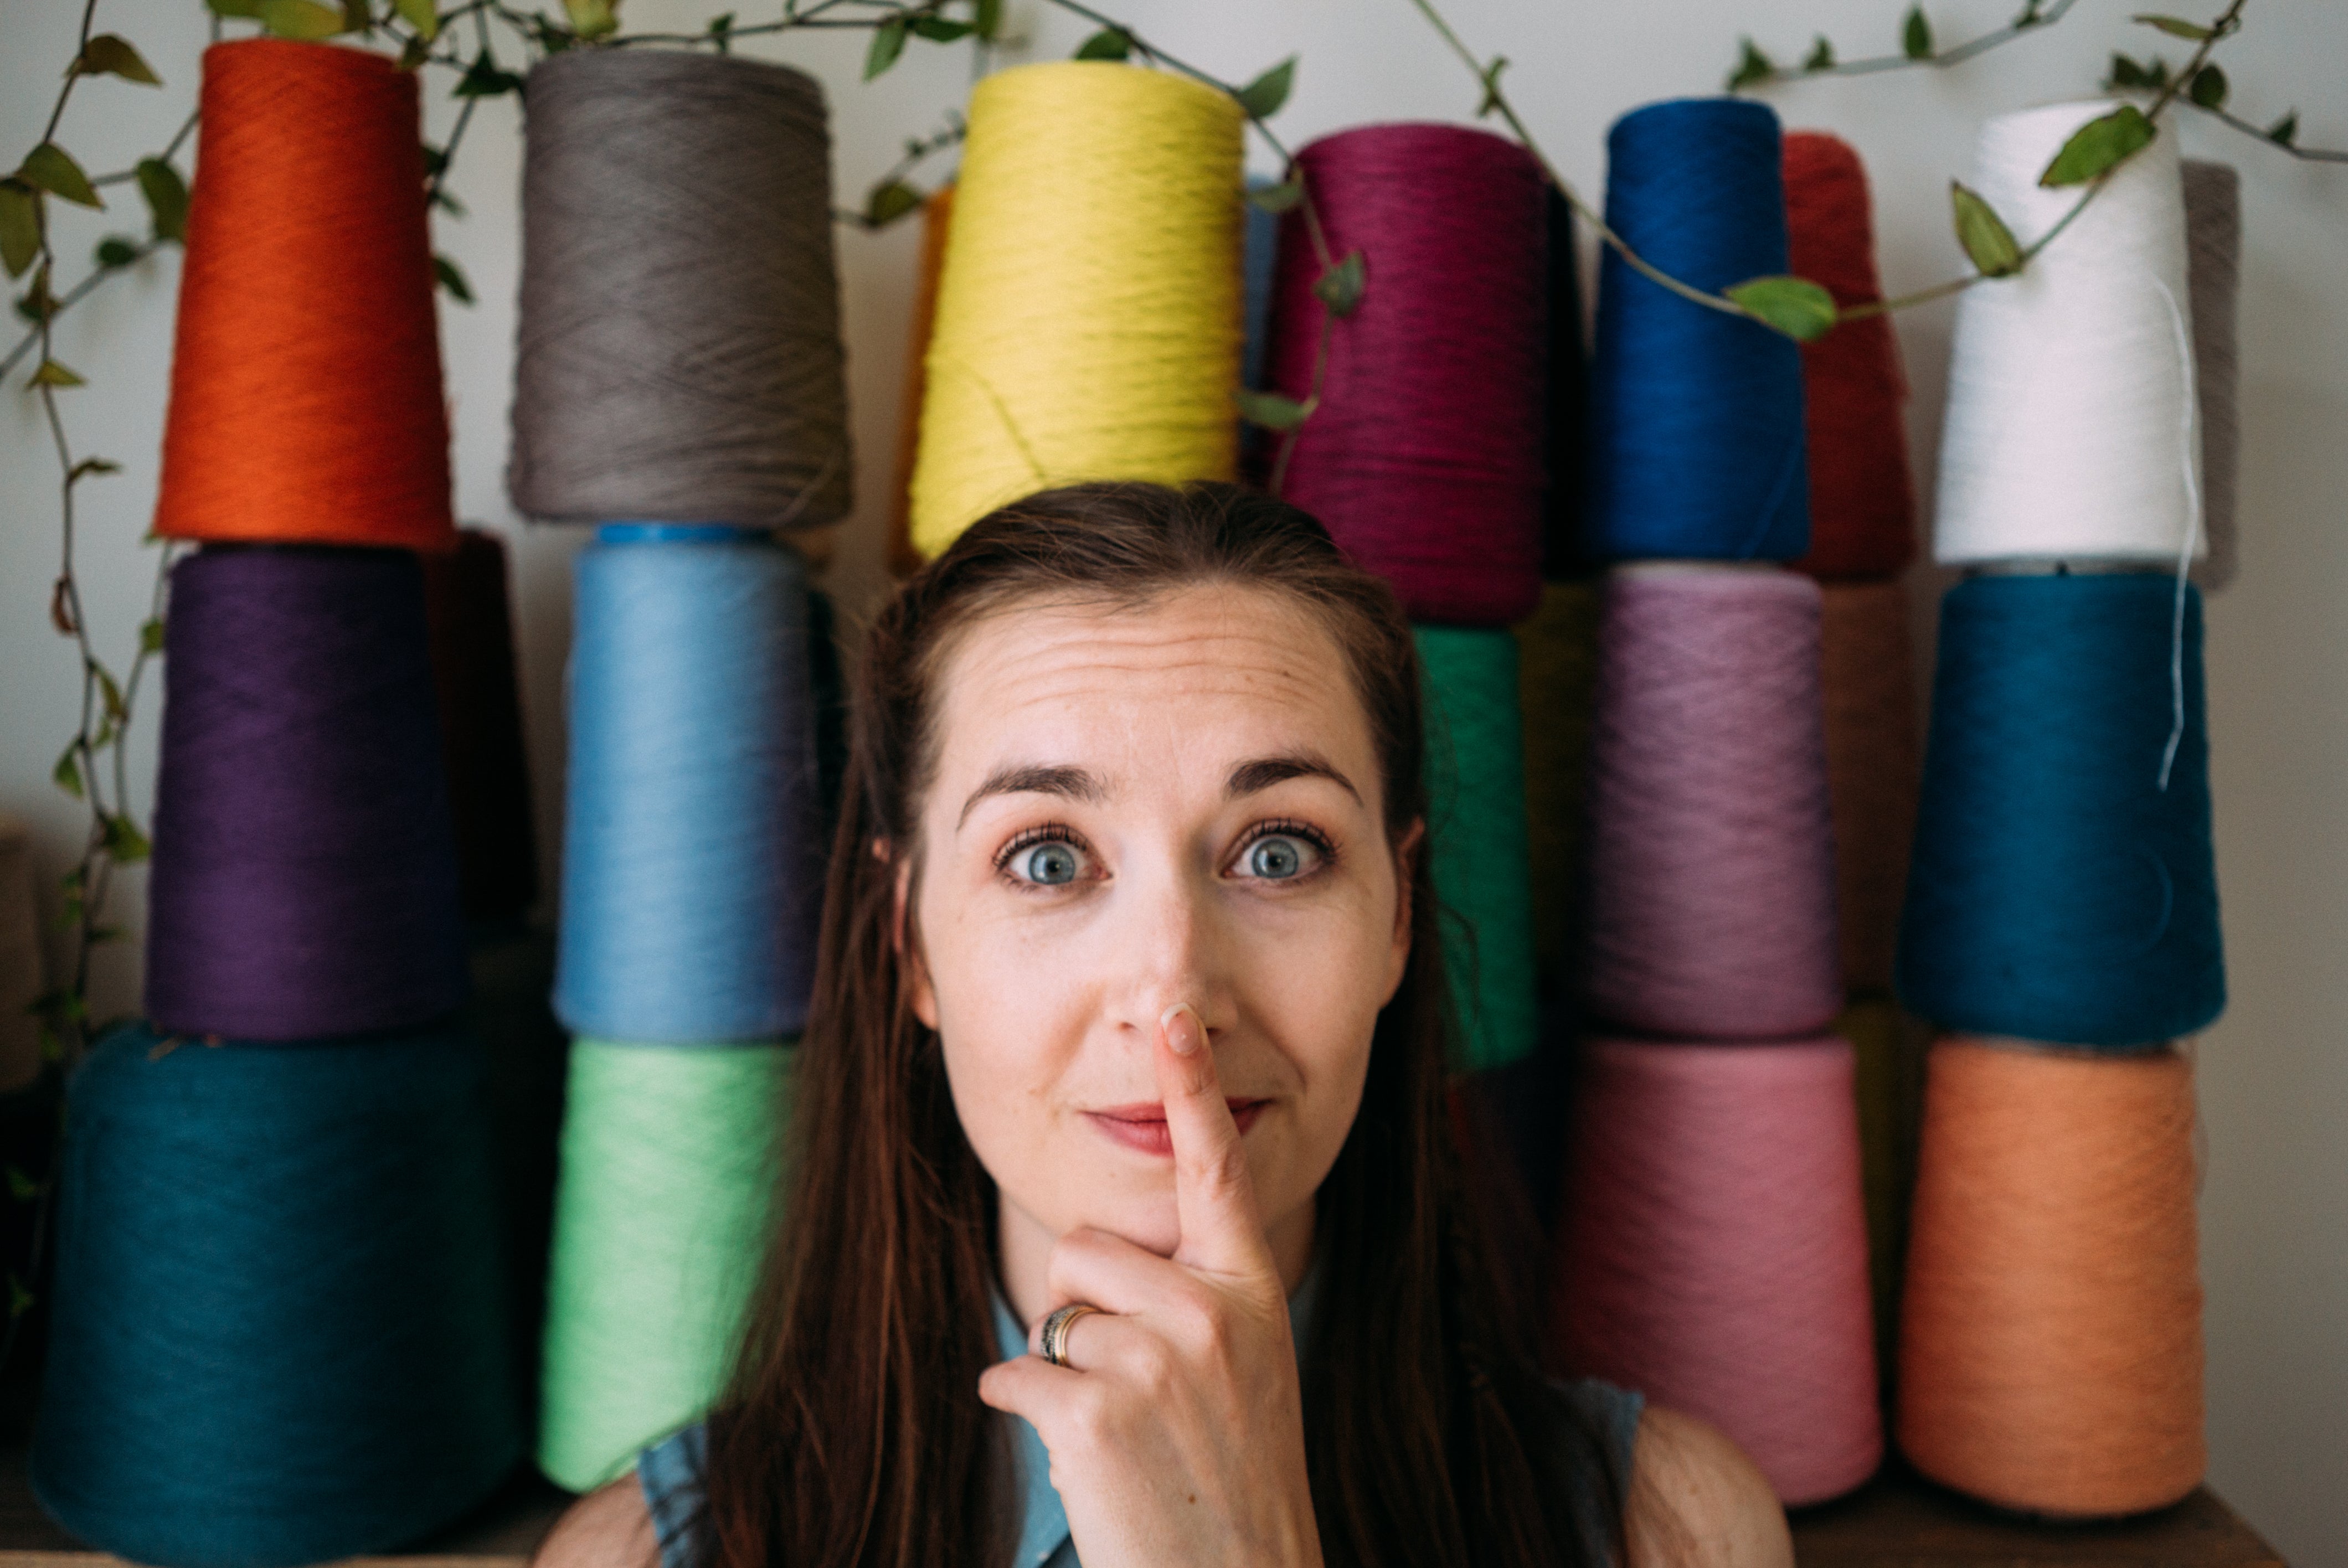 A white woman, Alice, in her 30's stands before a wall of multi-coloured yarn cones with her finger on her nose